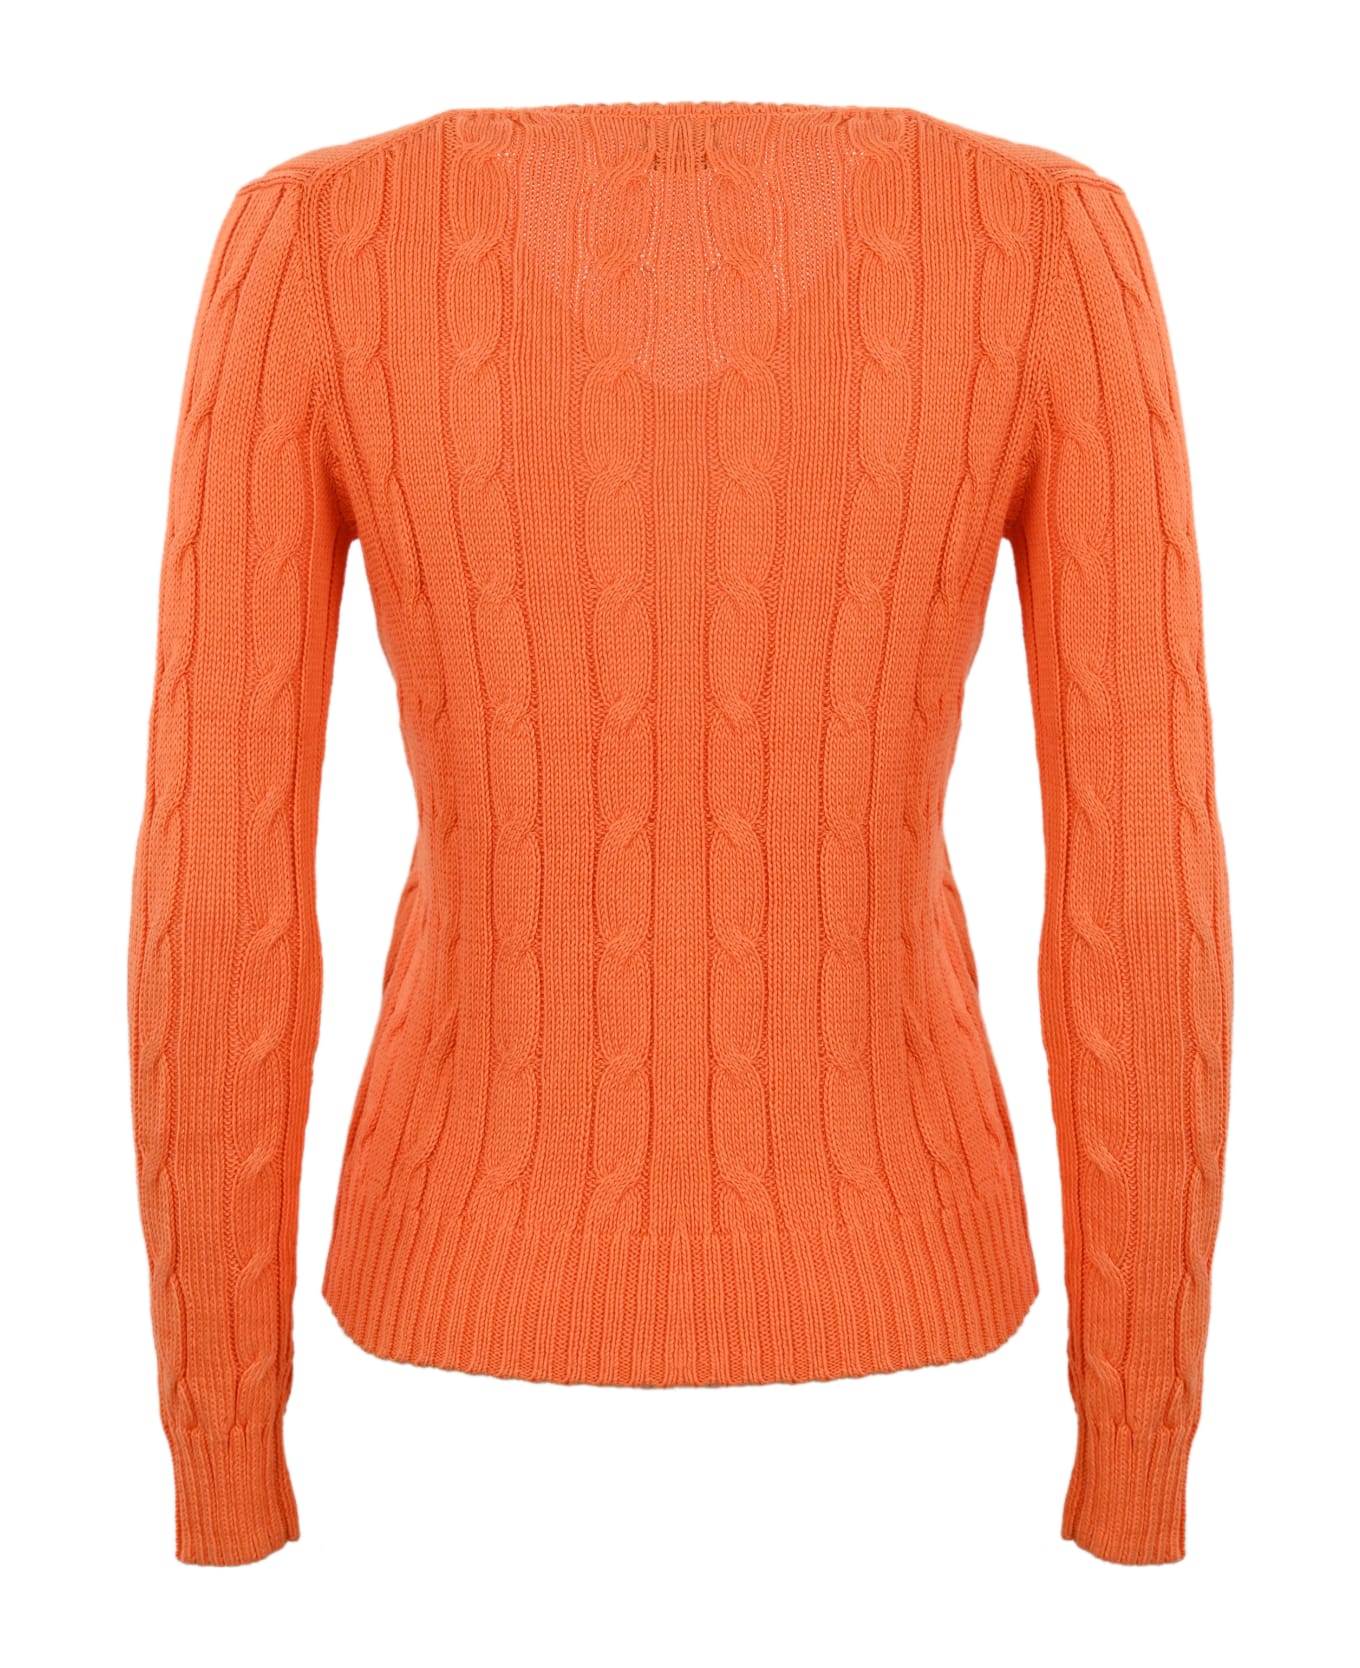 Polo Ralph Lauren Cable Knit Sweater With V-neck - SUNORANGE